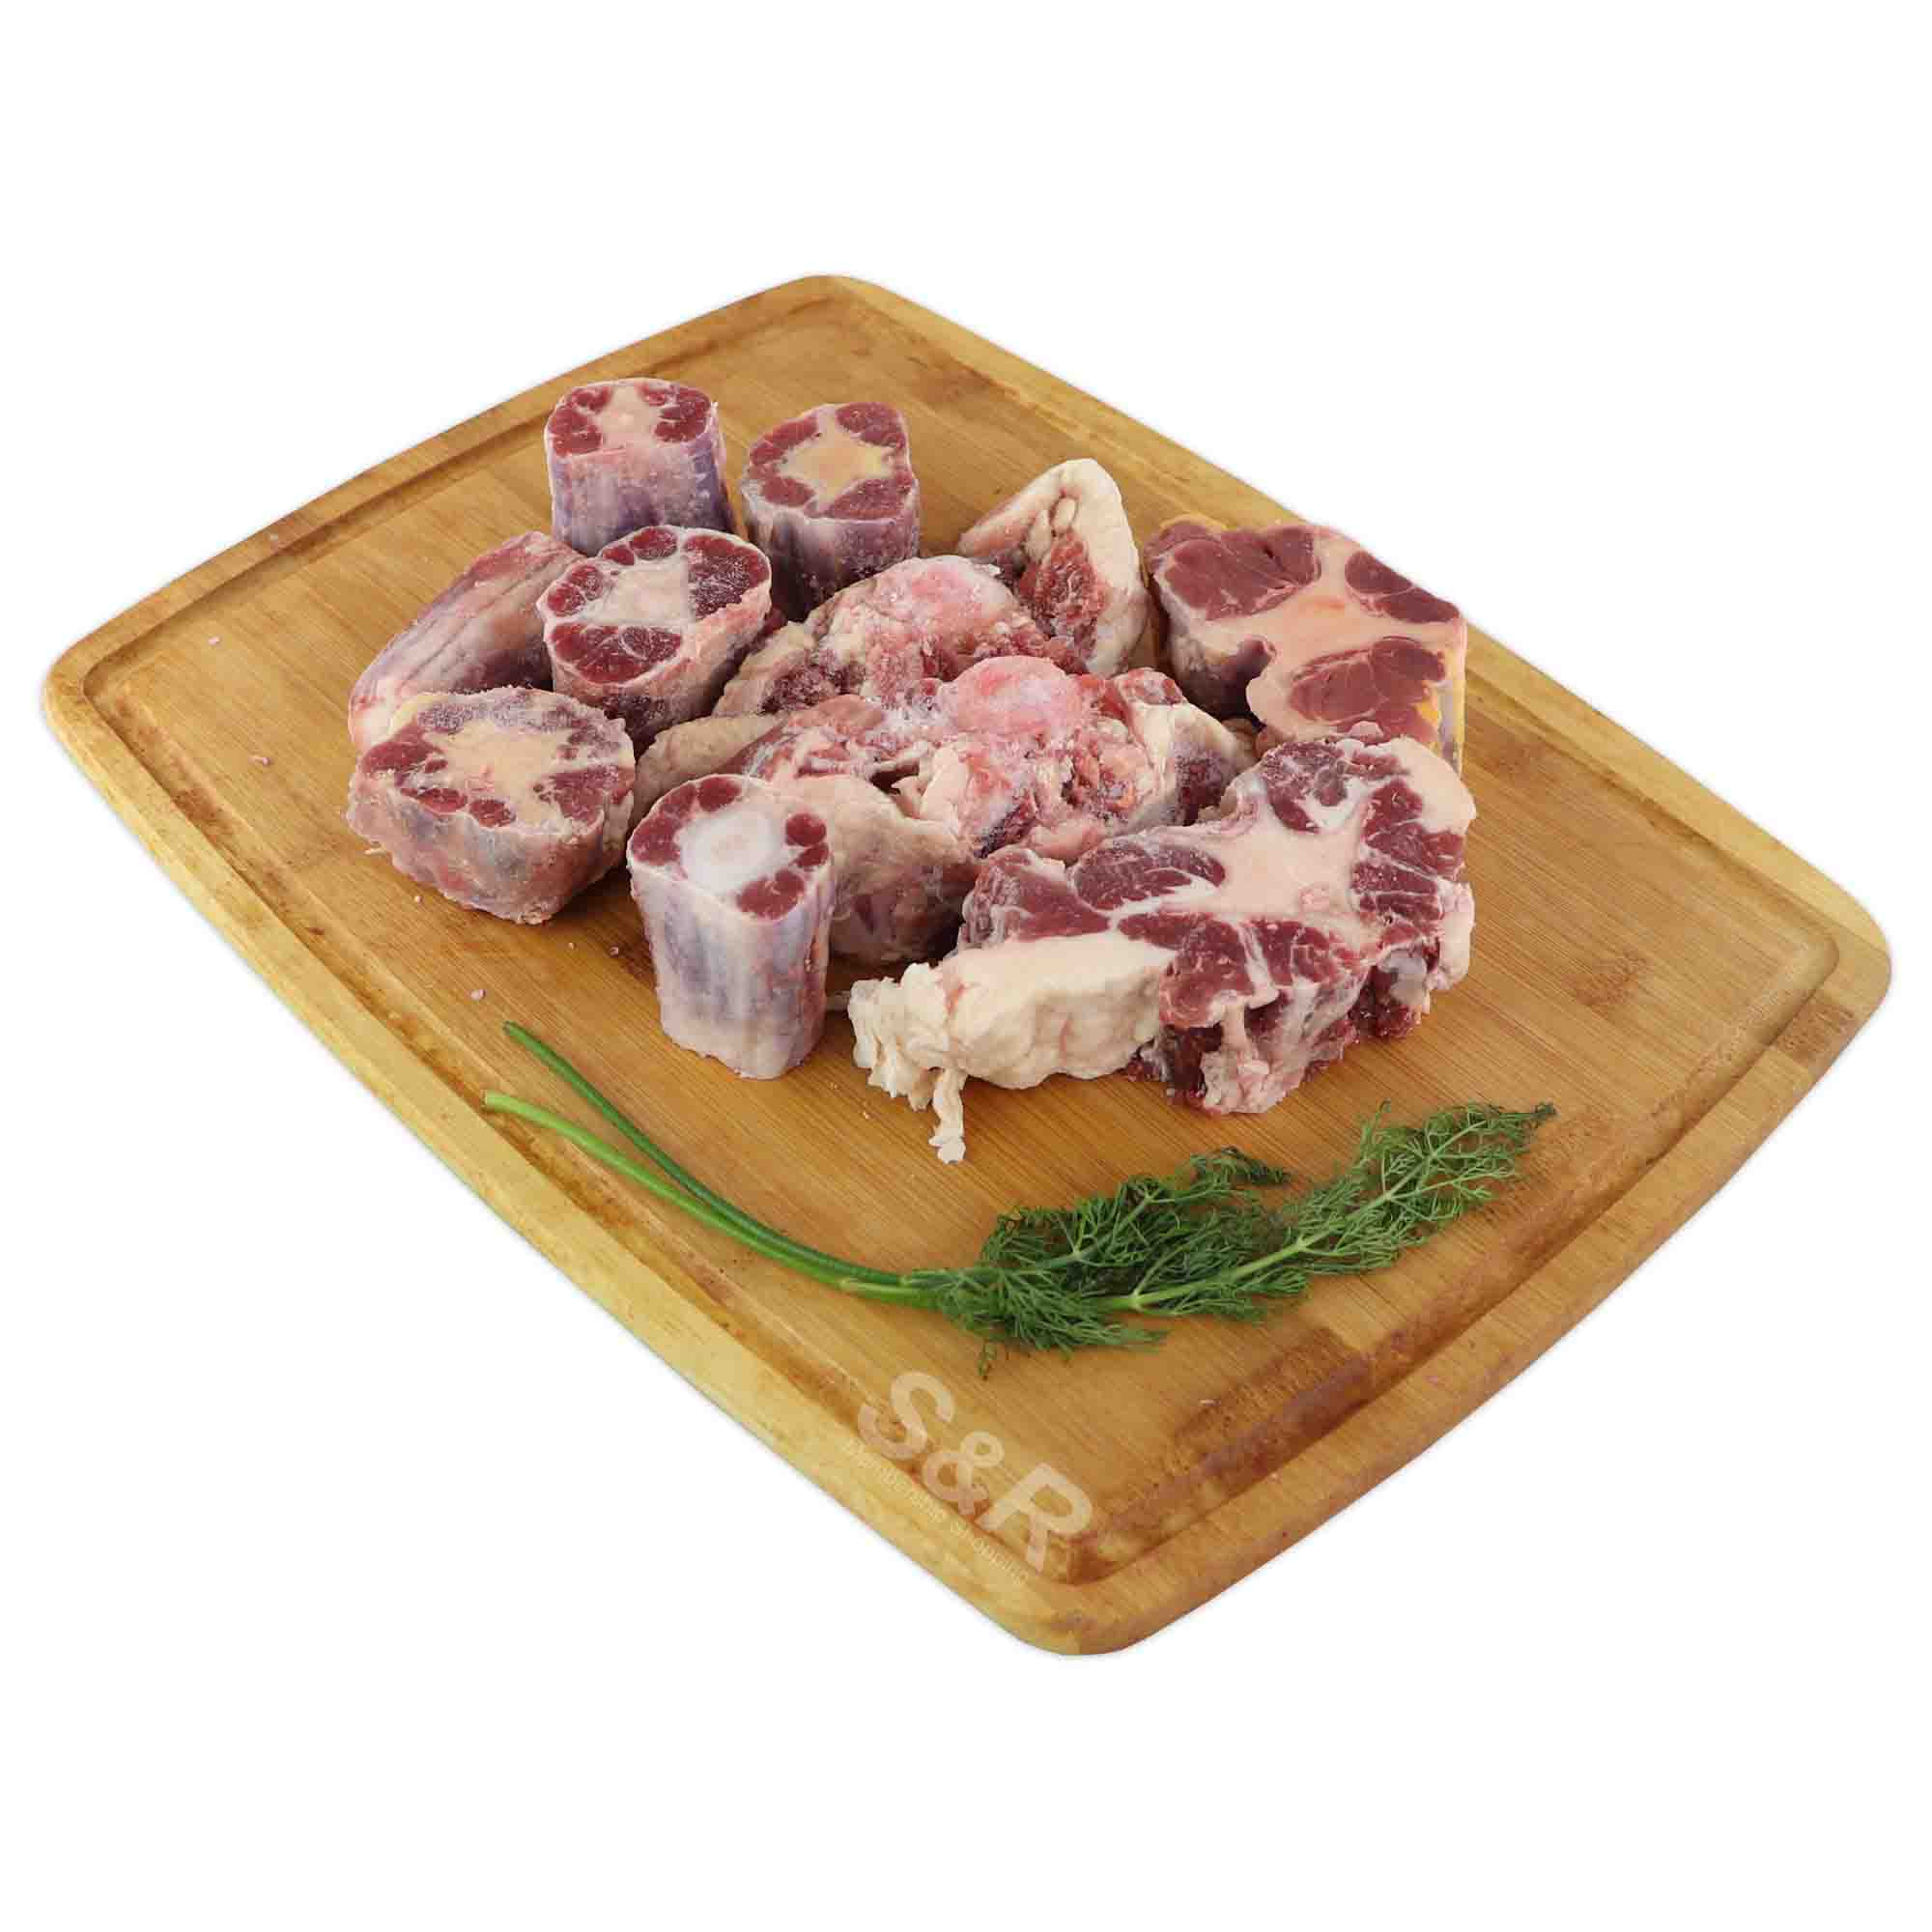 Members' Value Beef Ox Tail approx. 2kg